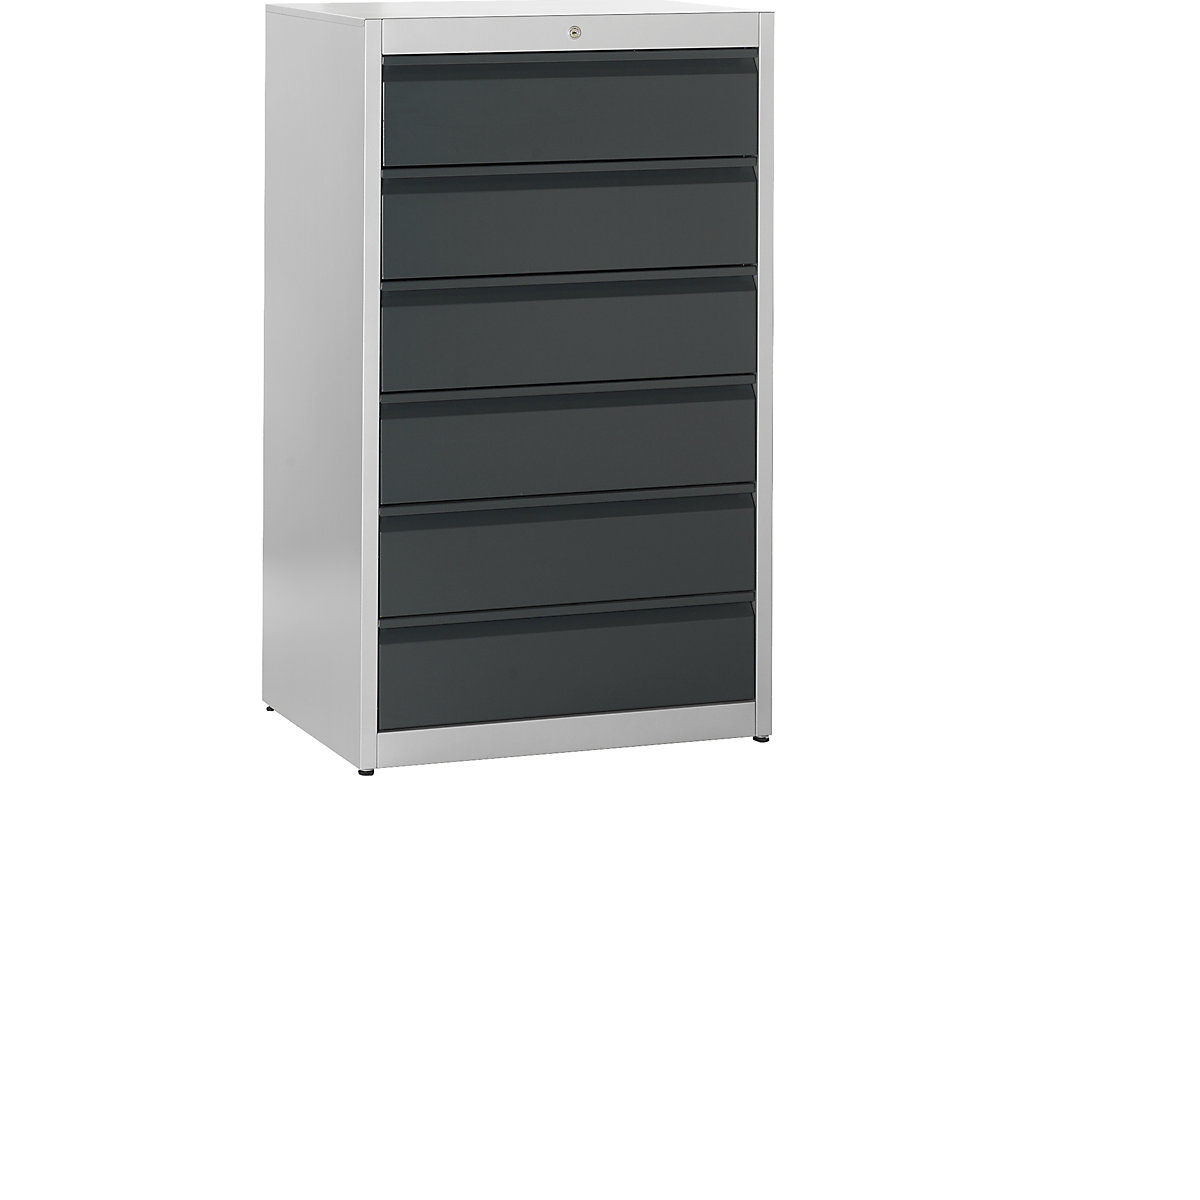 Card file cabinet, grip rails – mauser, 6 drawers, 3-track, white aluminium / charcoal-6